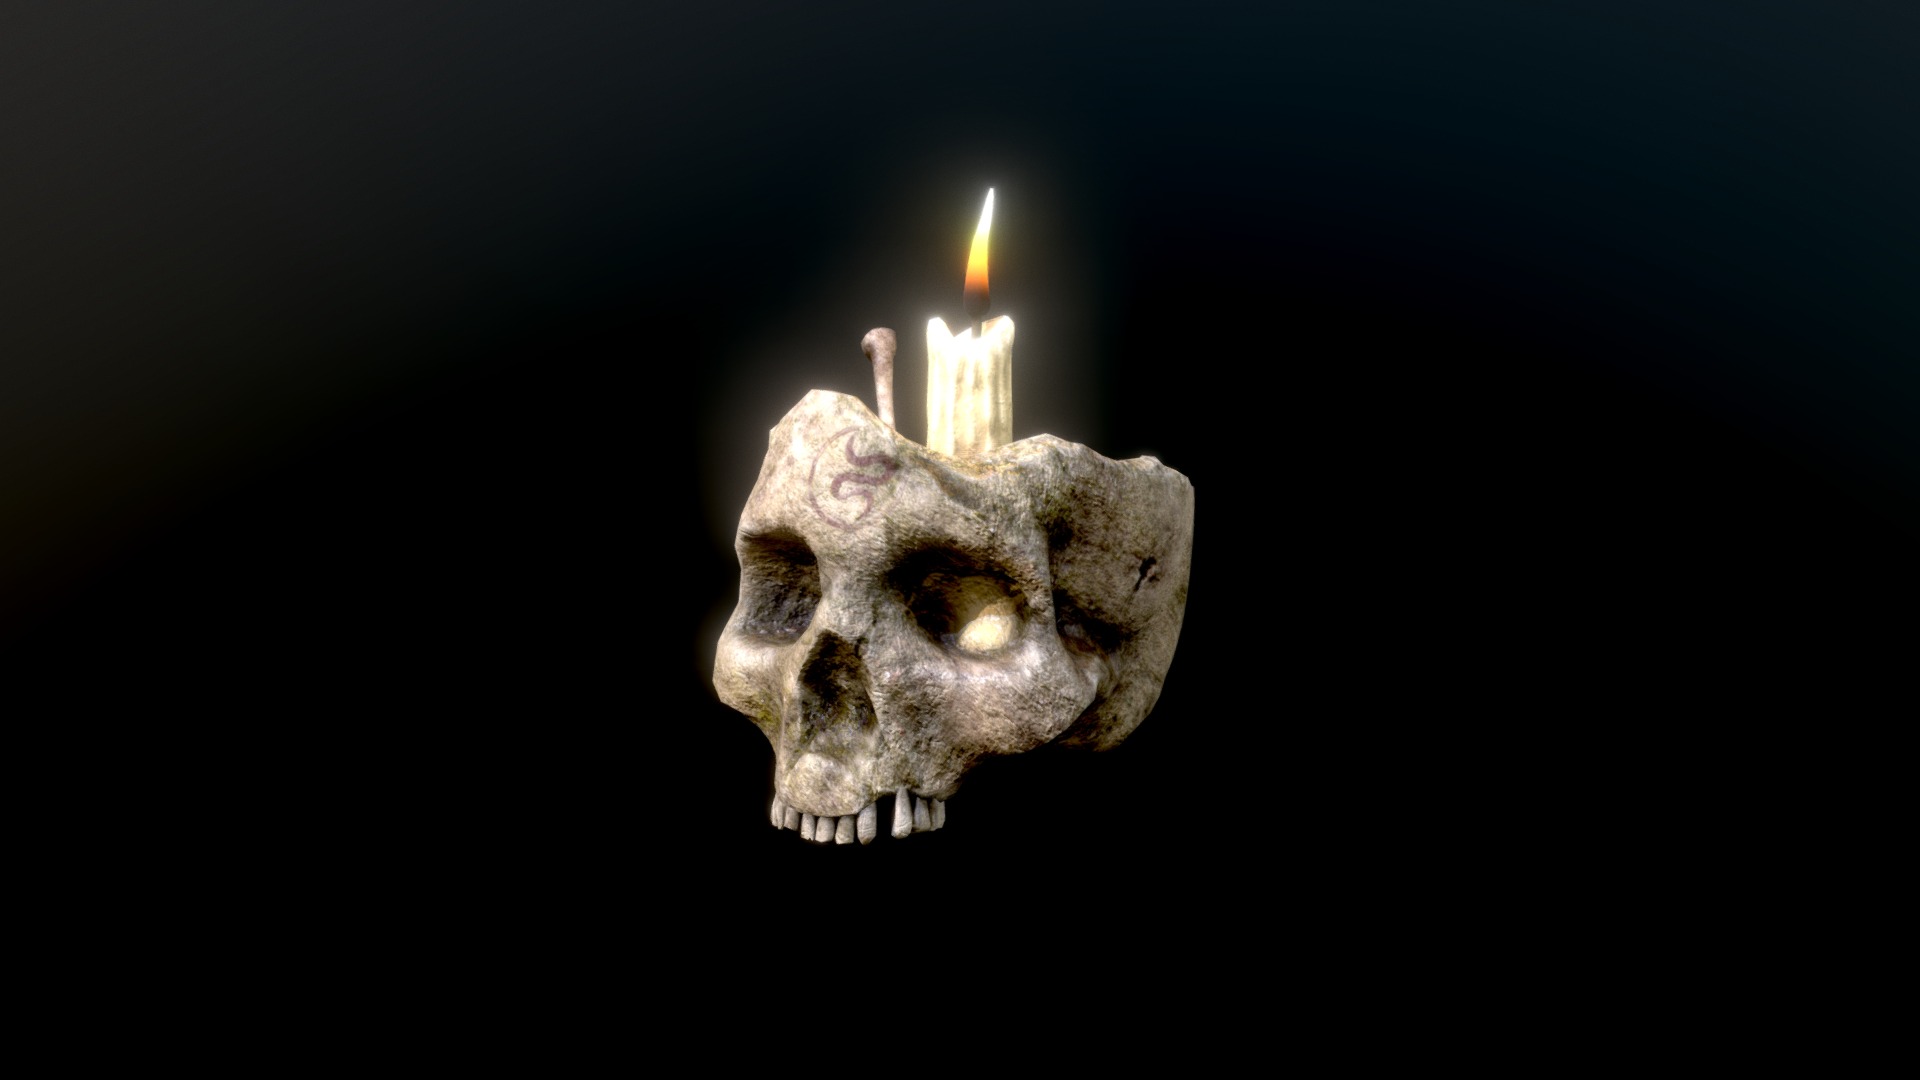 3D model HIE Skull Candle D180309 - This is a 3D model of the HIE Skull Candle D180309. The 3D model is about a skull with a flame.